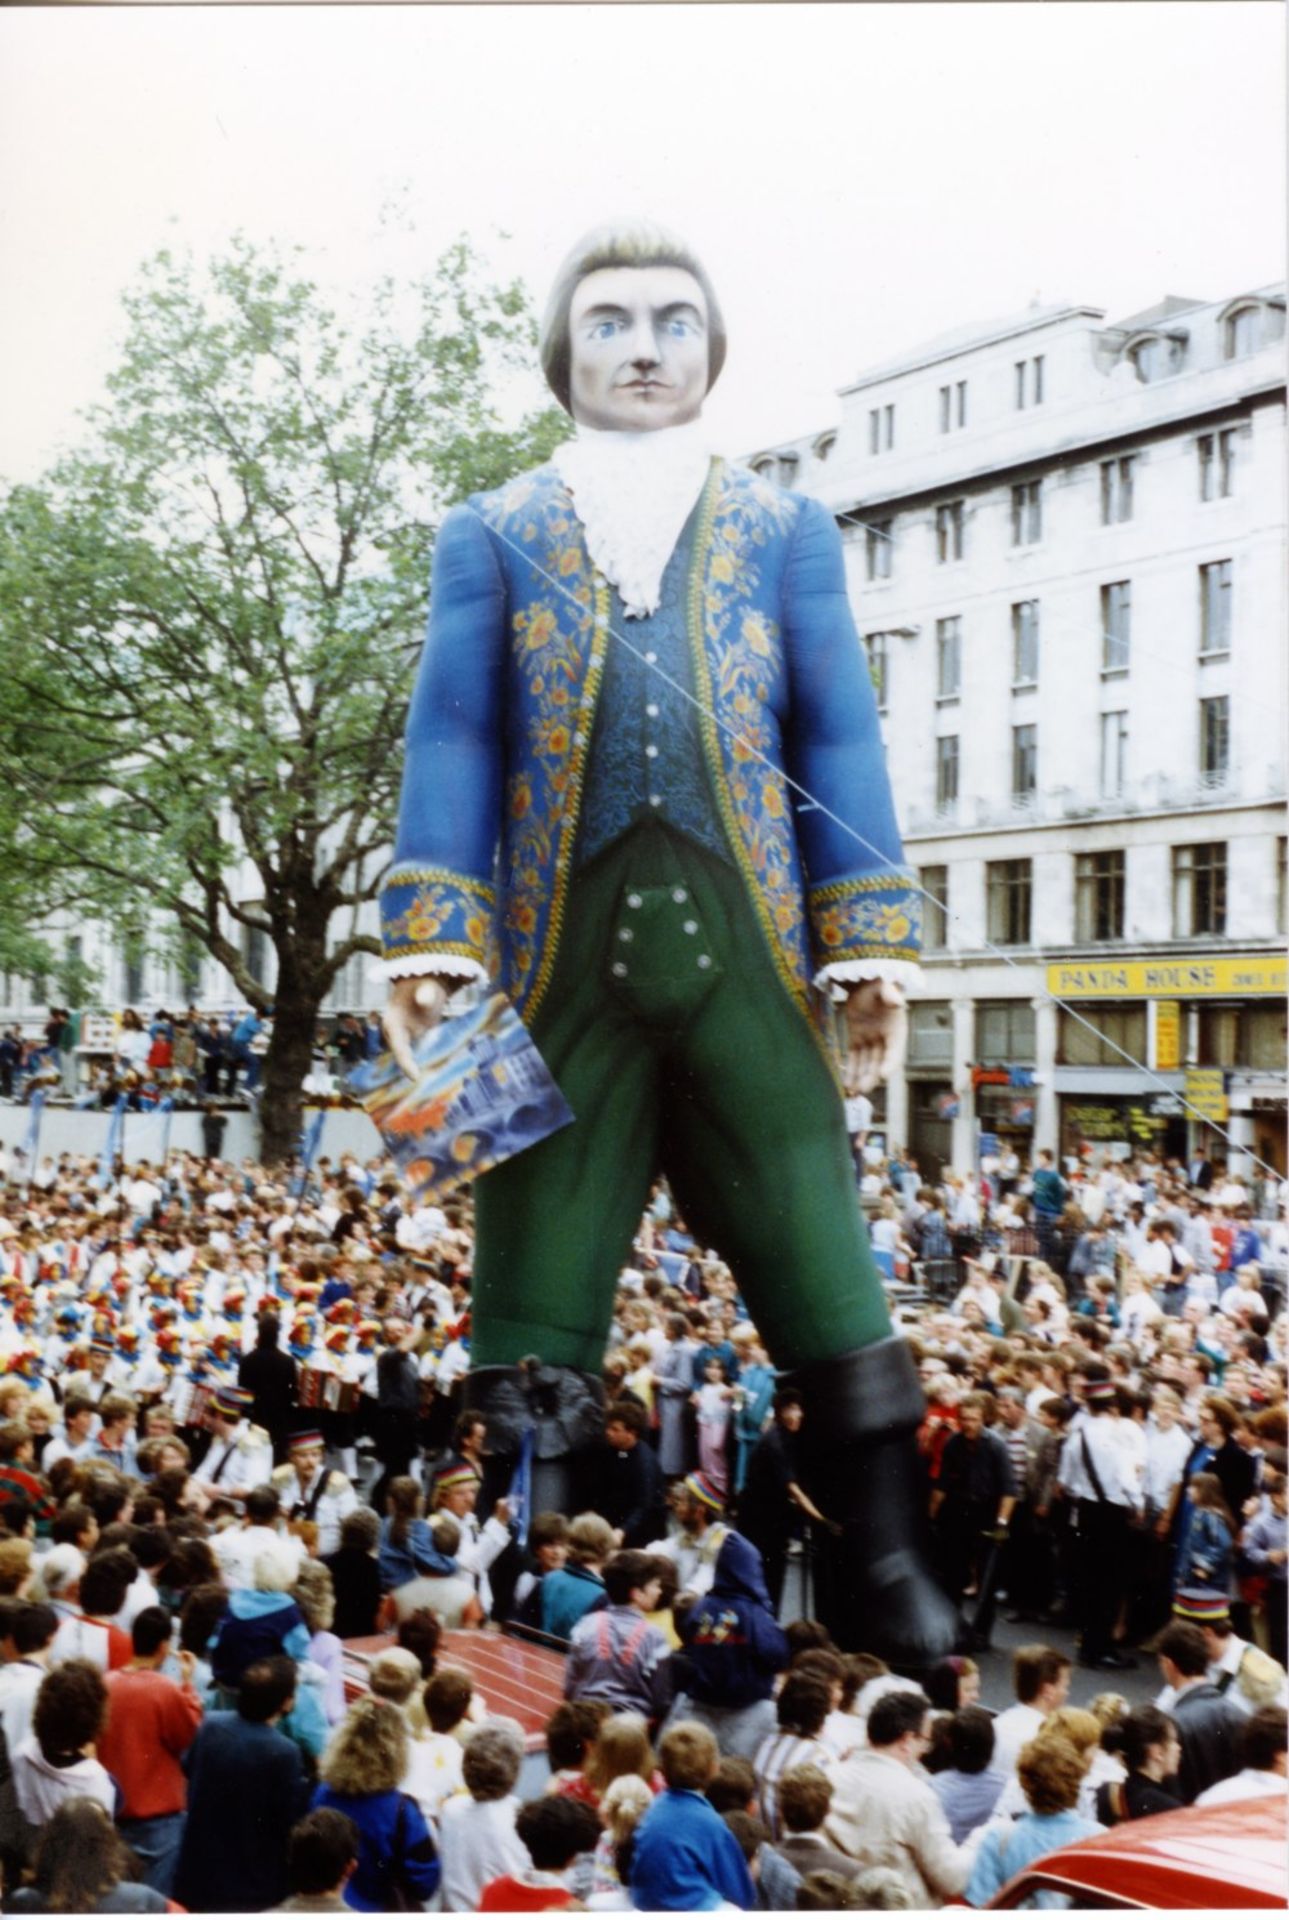 Gulliver

25' tall, wearing shirt waistcoat and boots. Comes with fan. - Image 2 of 3